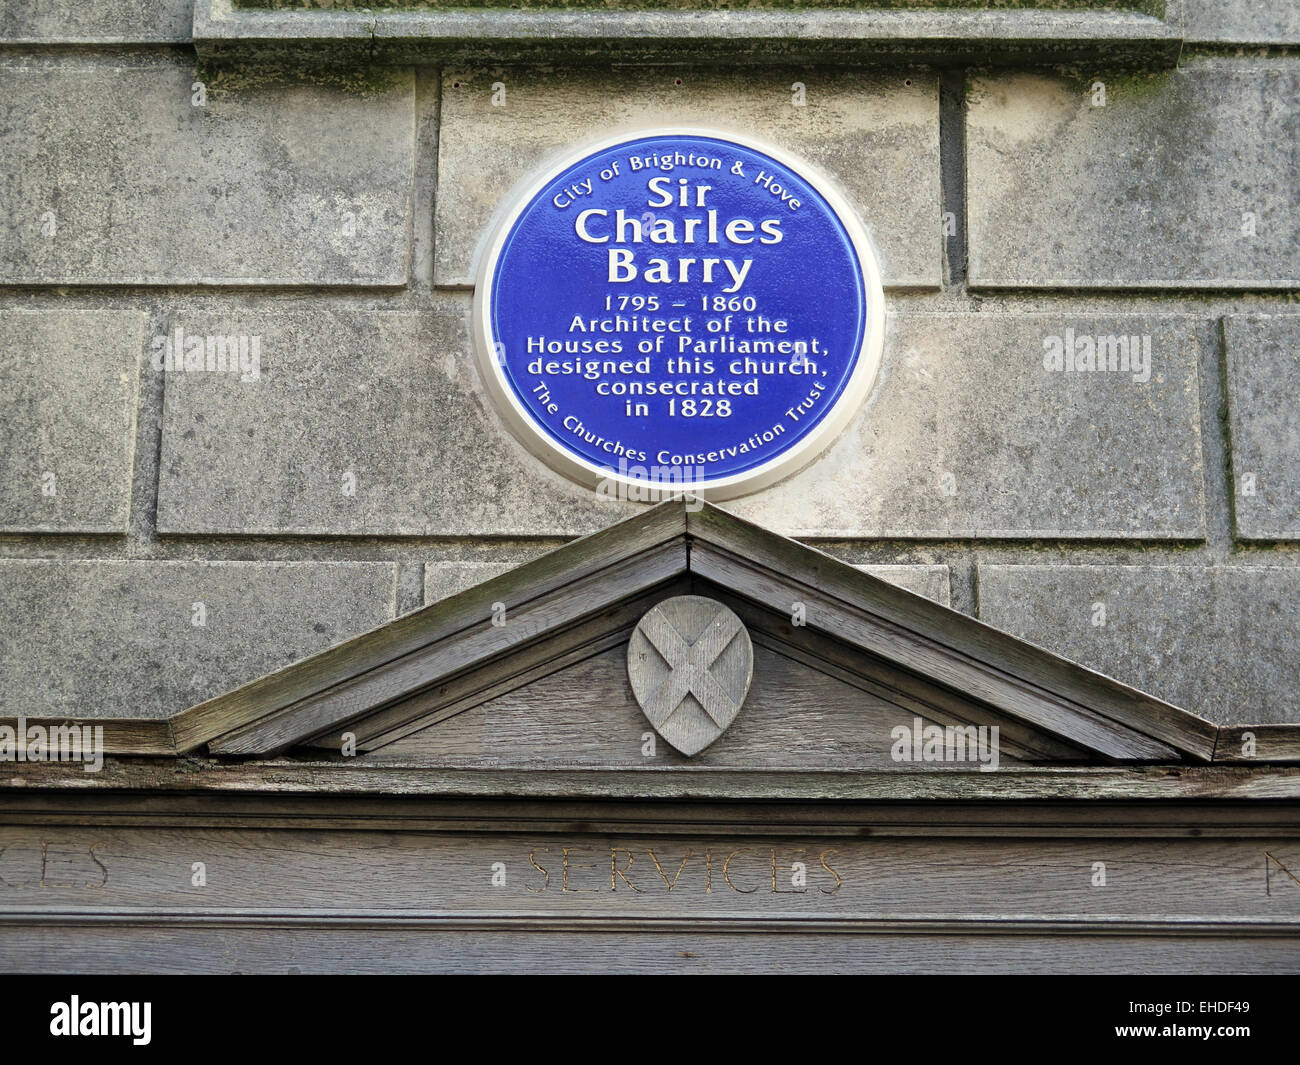 A Blue Plaque on the wall of St. Andrews Church in Waterloo Street, Brighton to commemorate the architect Sir Charles Barry, who designed the Houses of Parliment, and also designed this church in 1828. Stock Photo